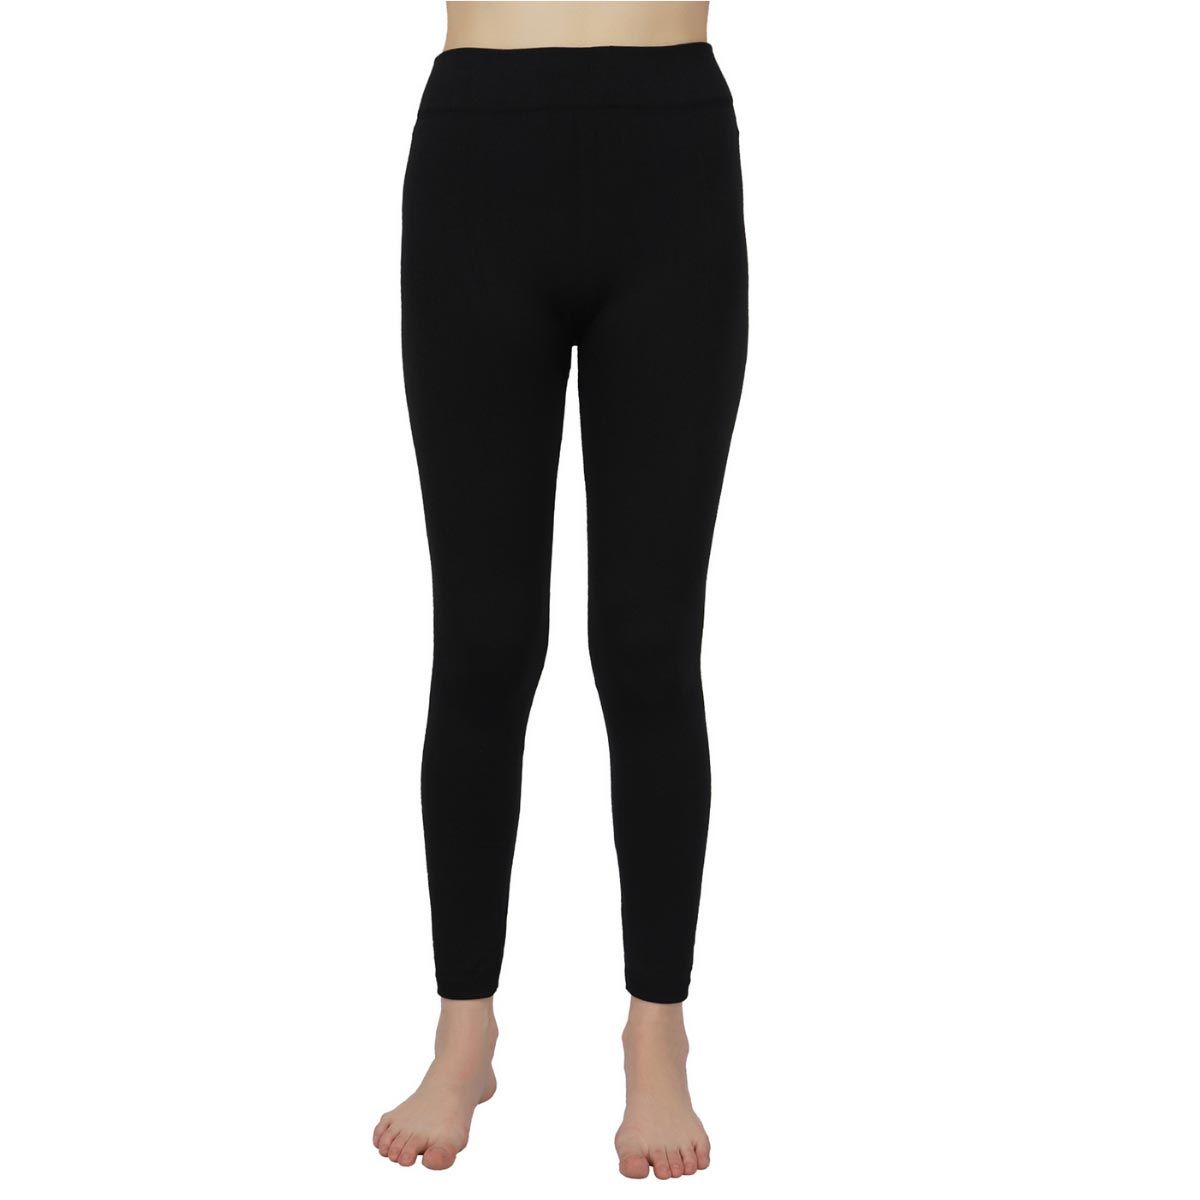 Women's Leggings Chill Chasers Collection (Merino Wool) | Stanfields.com